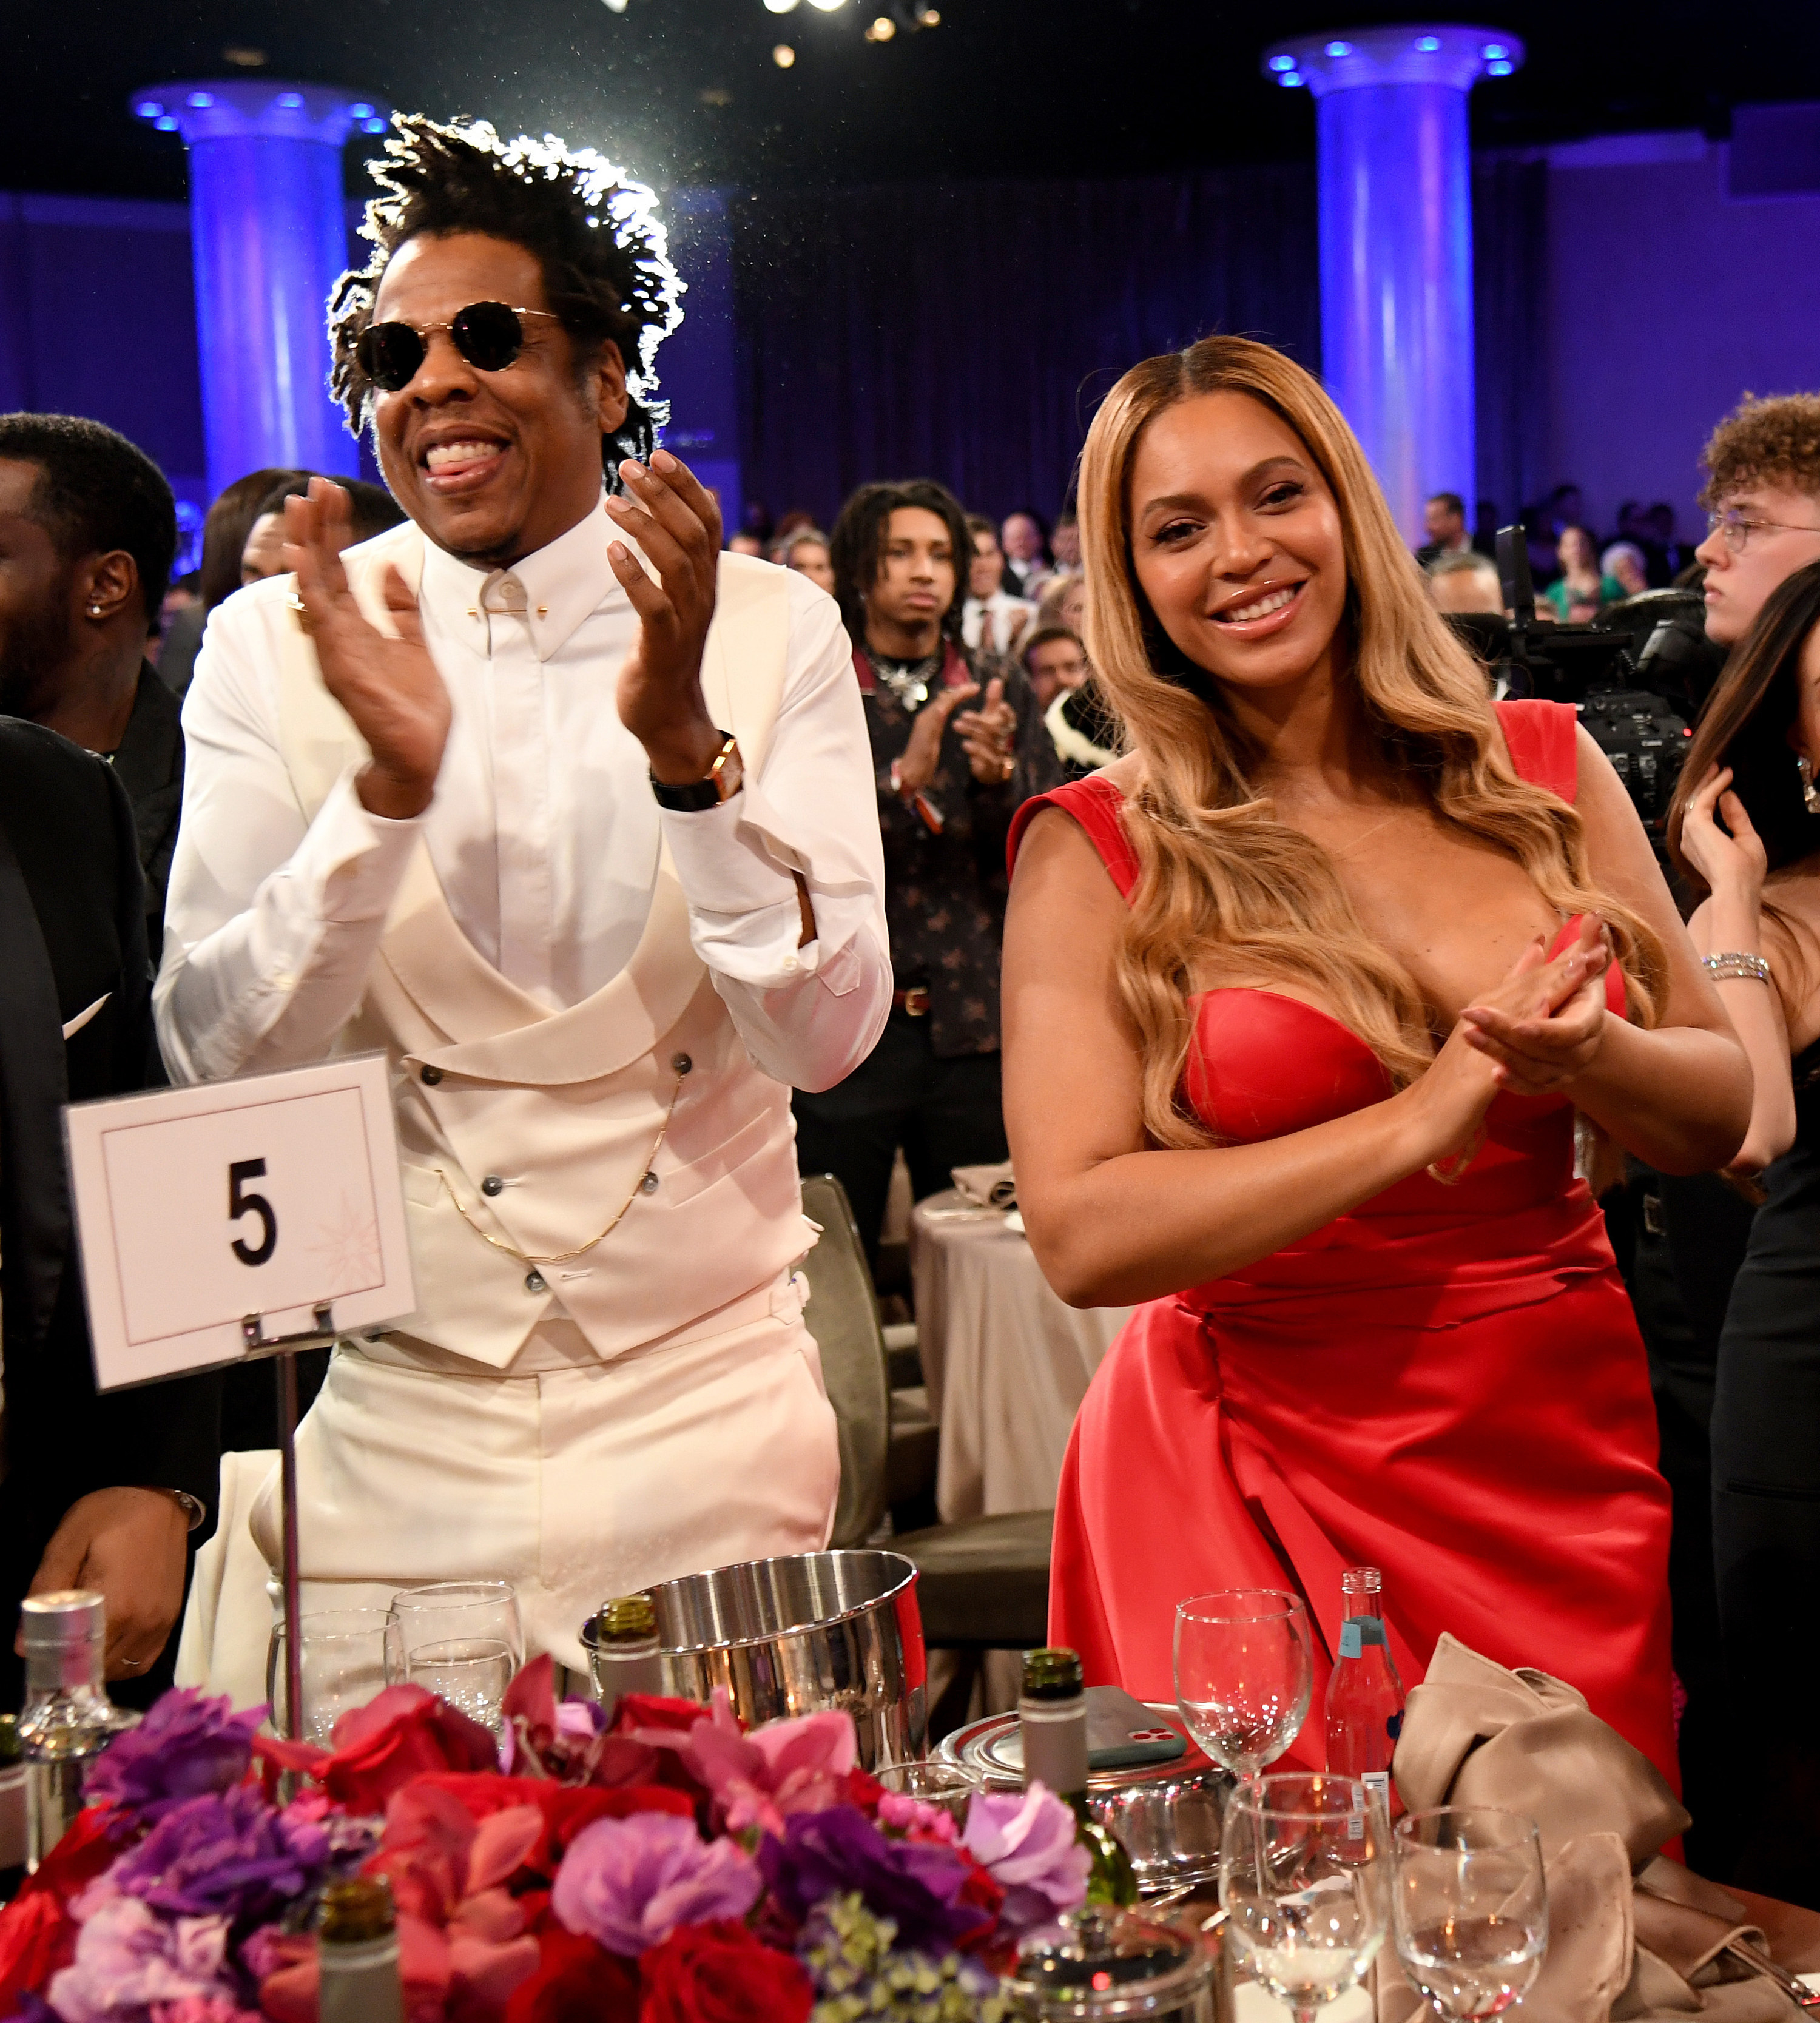 Jay-Z and Beyoncé stand and clap at a numbered table for an event